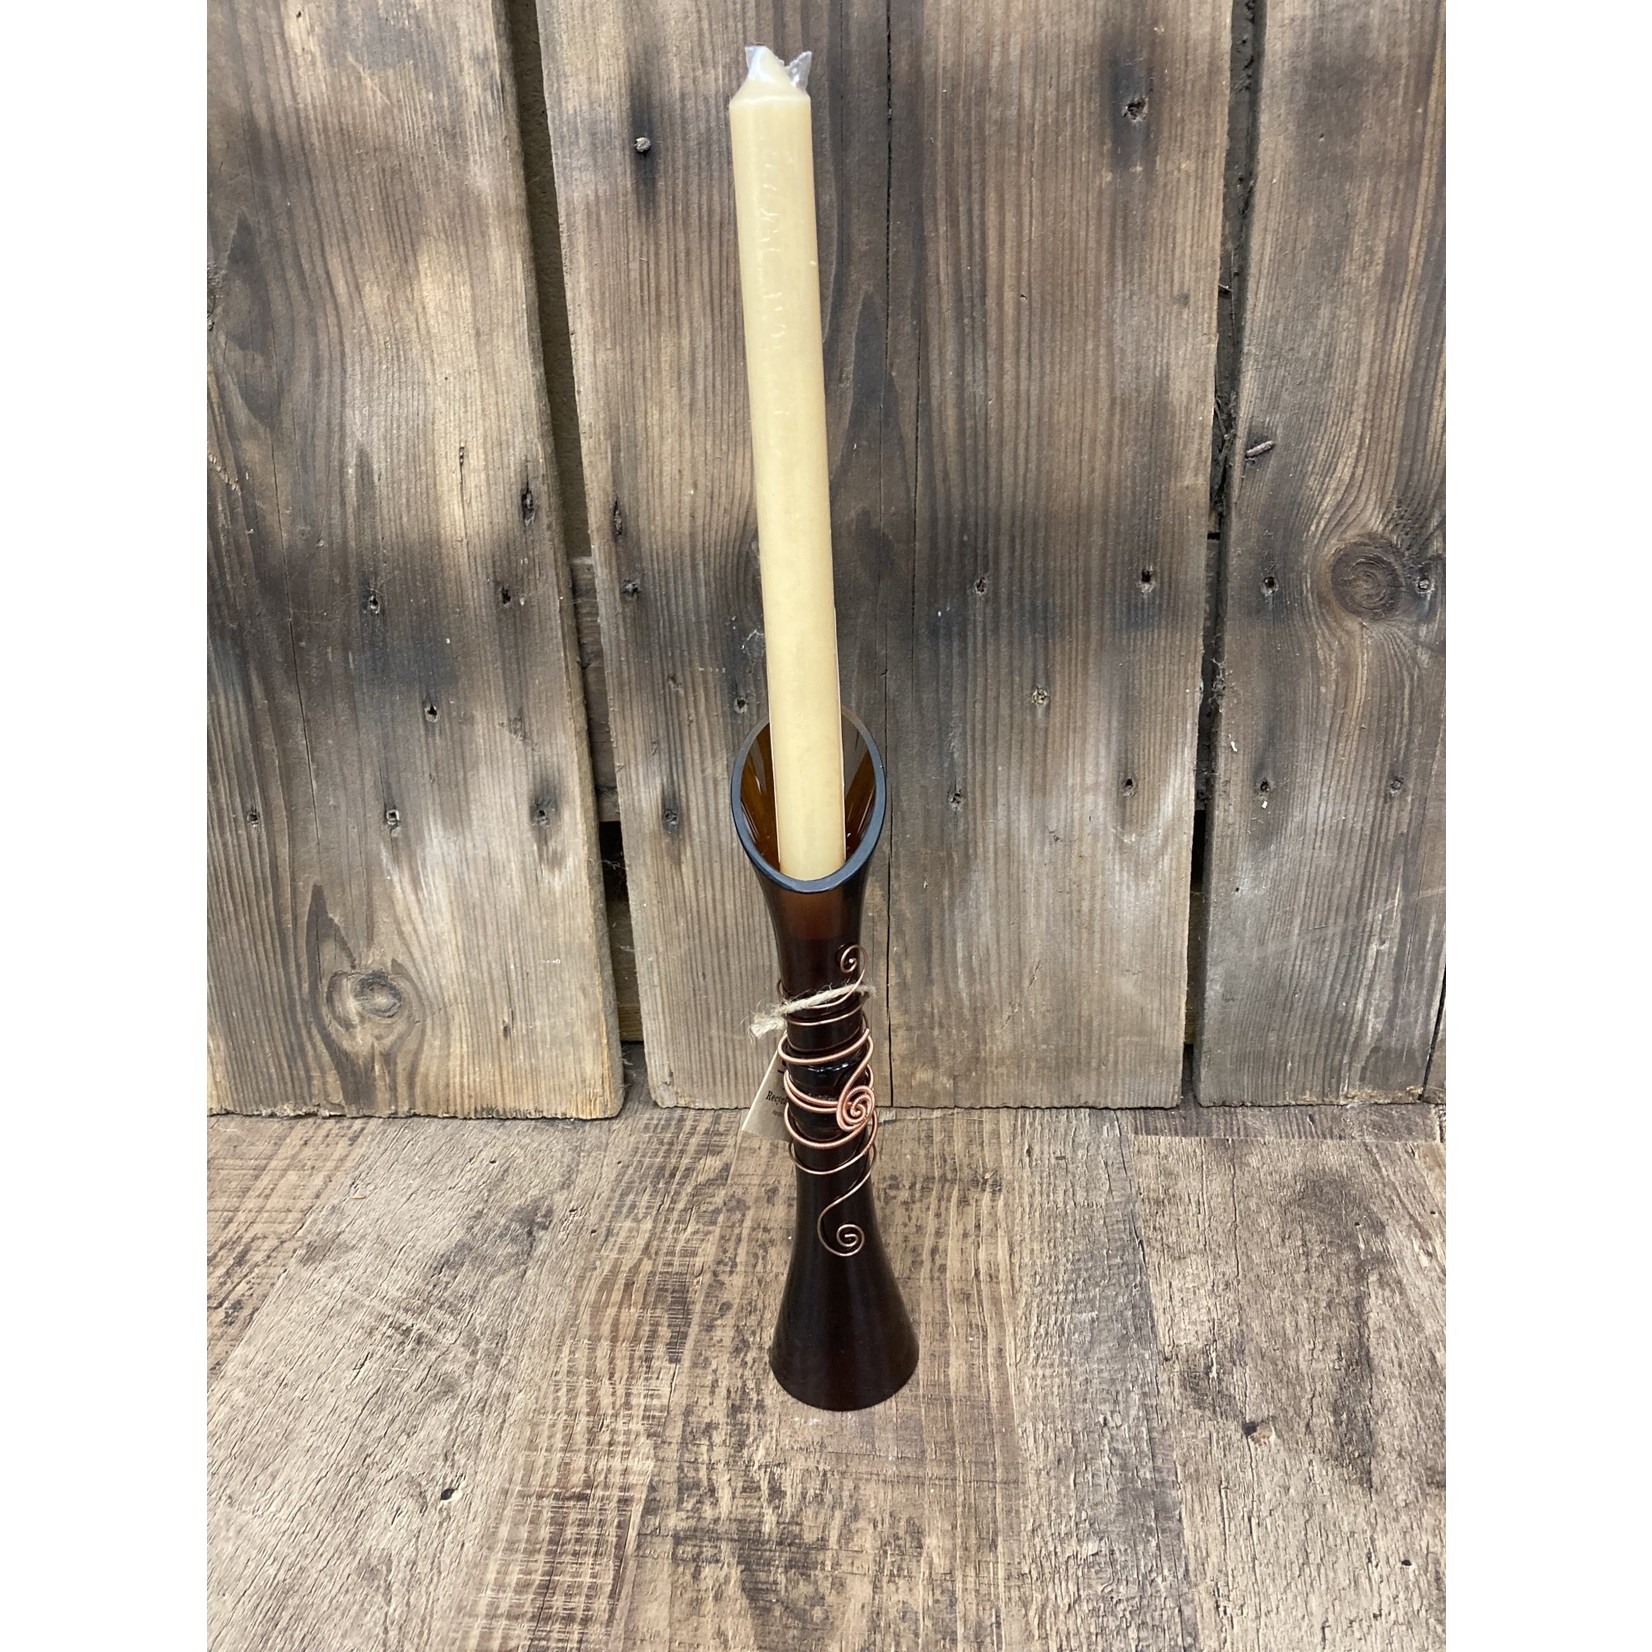 Susan Cowher Candles Uncorked Tall Candle Holder with Copper Wrap